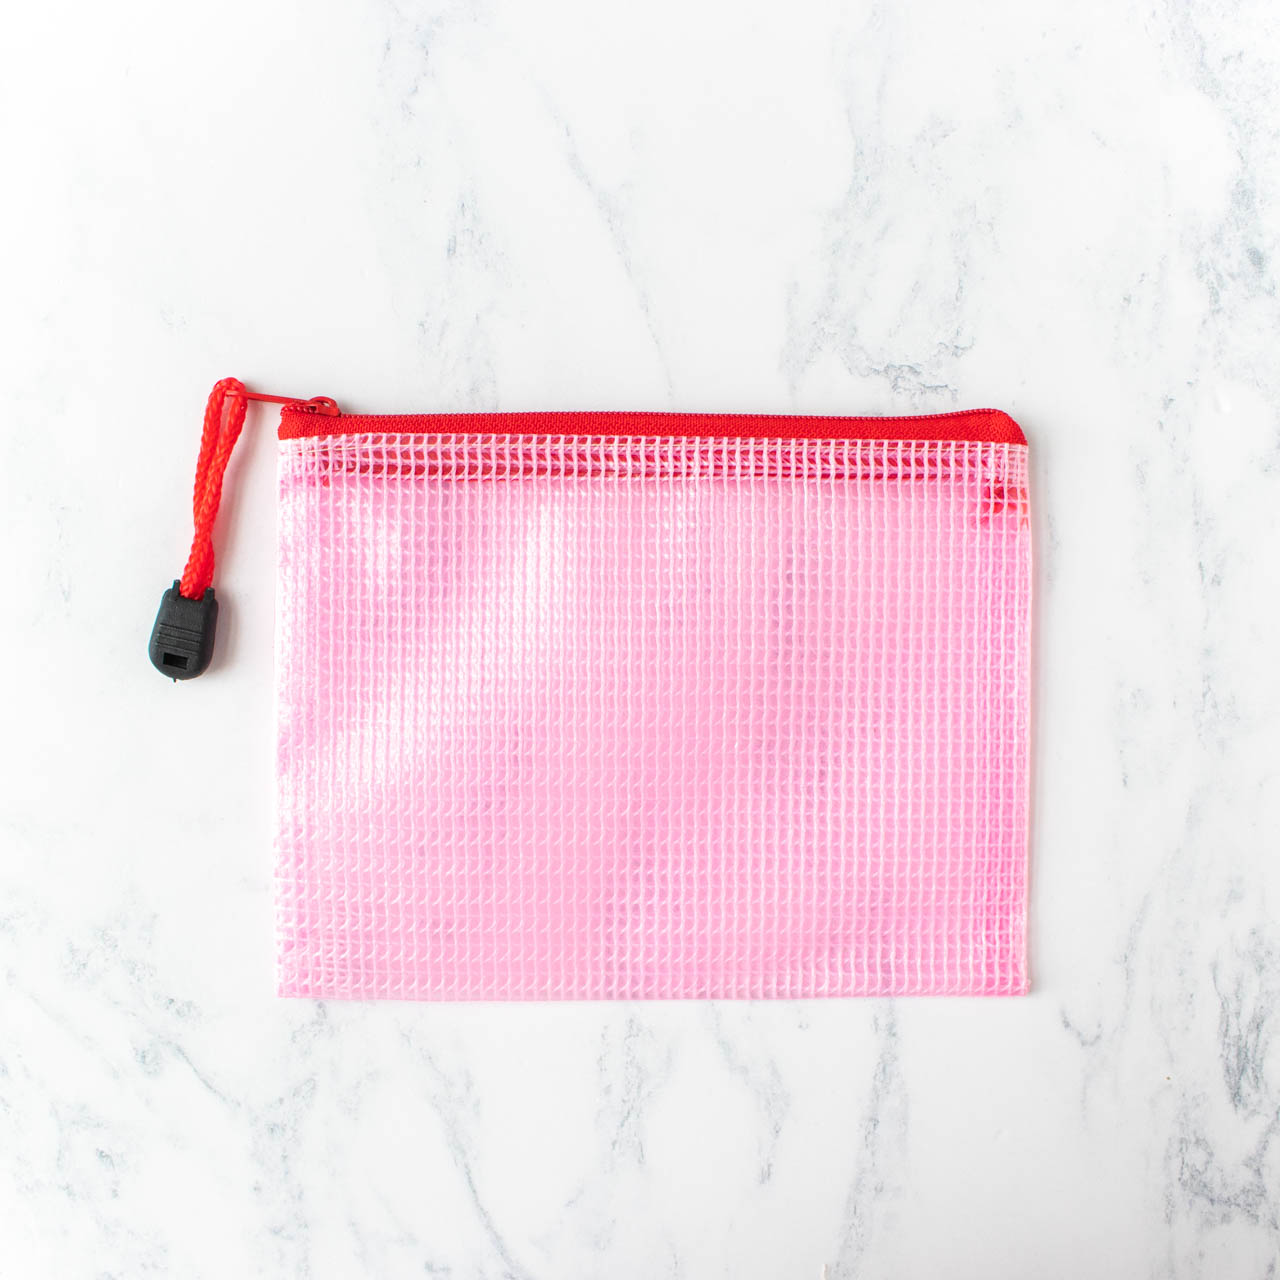 Clear Zipper Project Bags